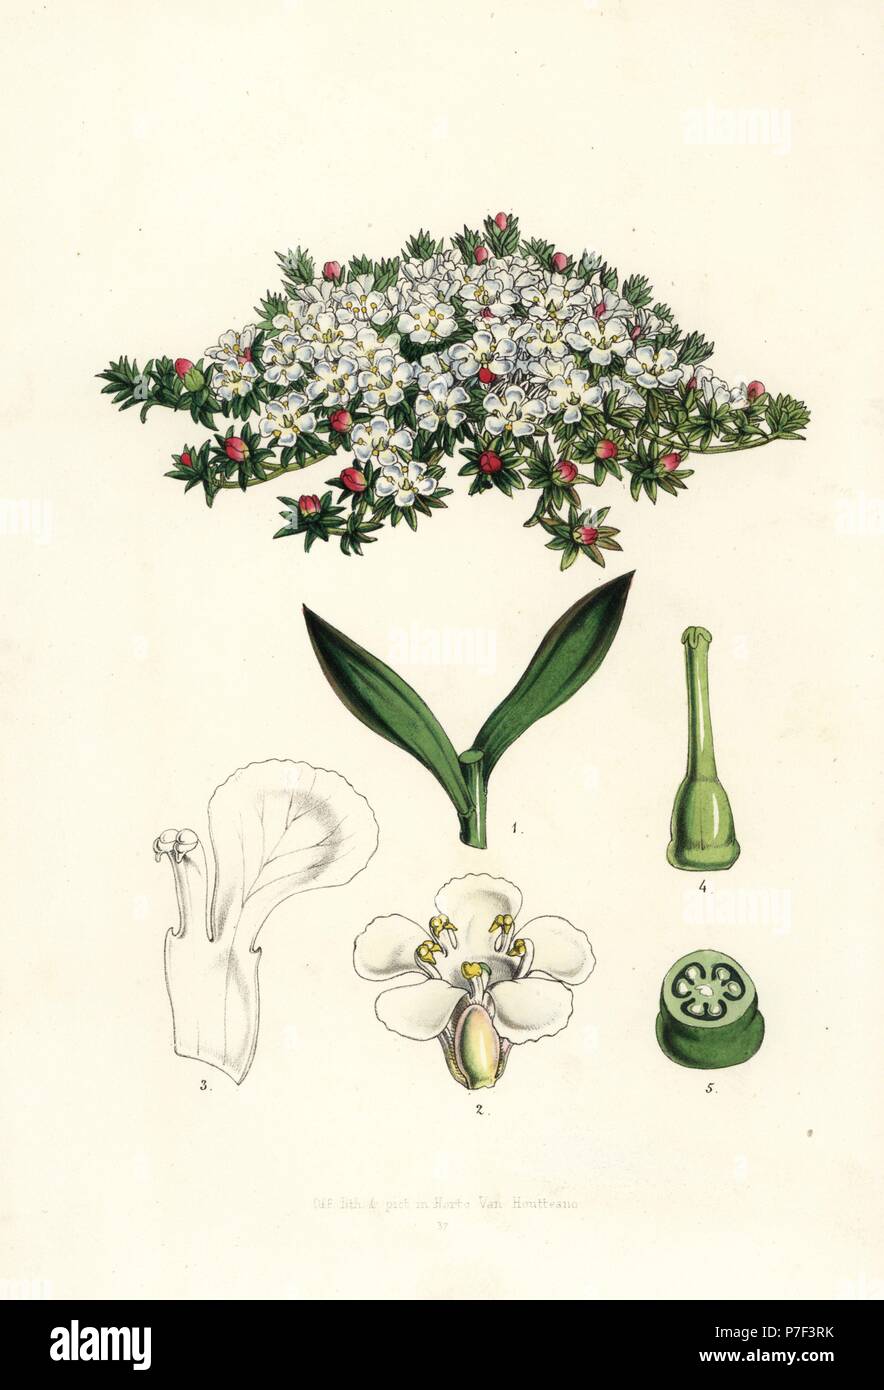 Flowering pixie-moss, Pyxidanthera barbulata. Handcoloured lithograph from Louis van Houtte and Charles Lemaire's Flowers of the Gardens and Hothouses of Europe, Flore des Serres et des Jardins de l'Europe, Ghent, Belgium, 1851. Stock Photo